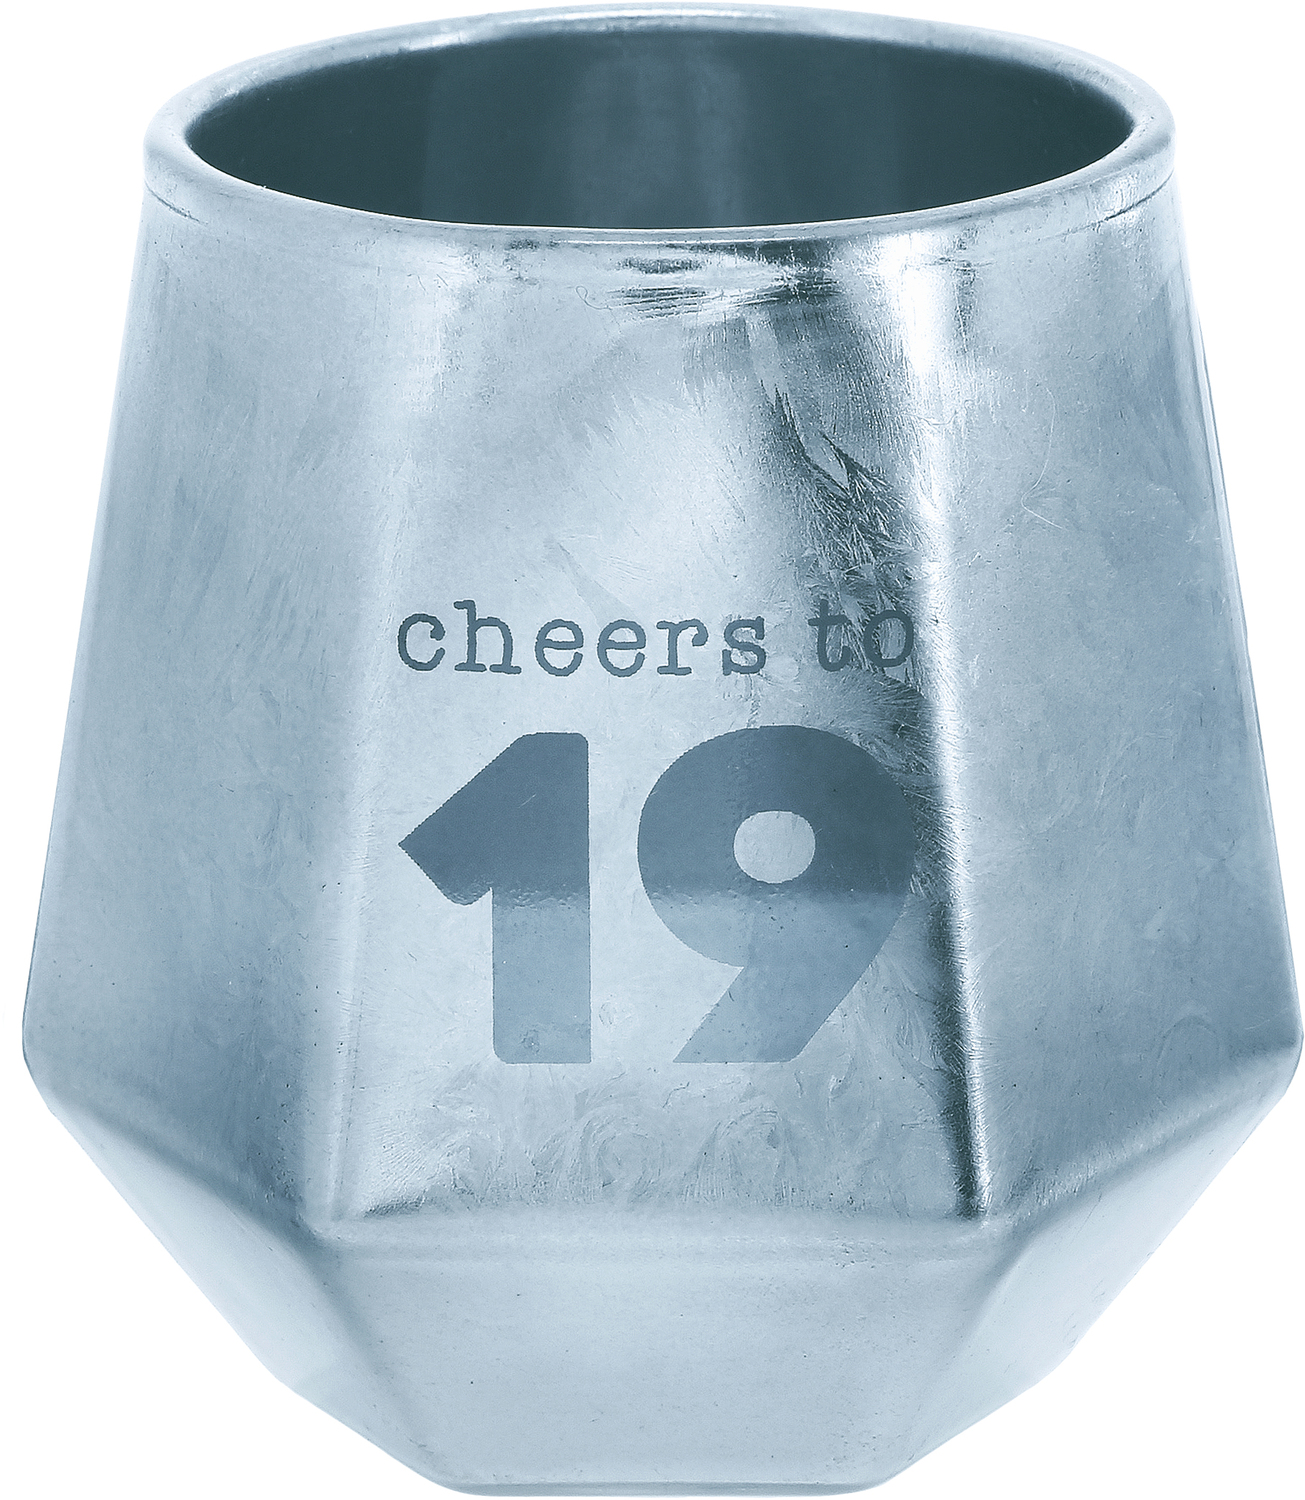 Cheers 19 by Happy Confetti to You - Cheers 19 - 3 oz Geometric Shot Glass